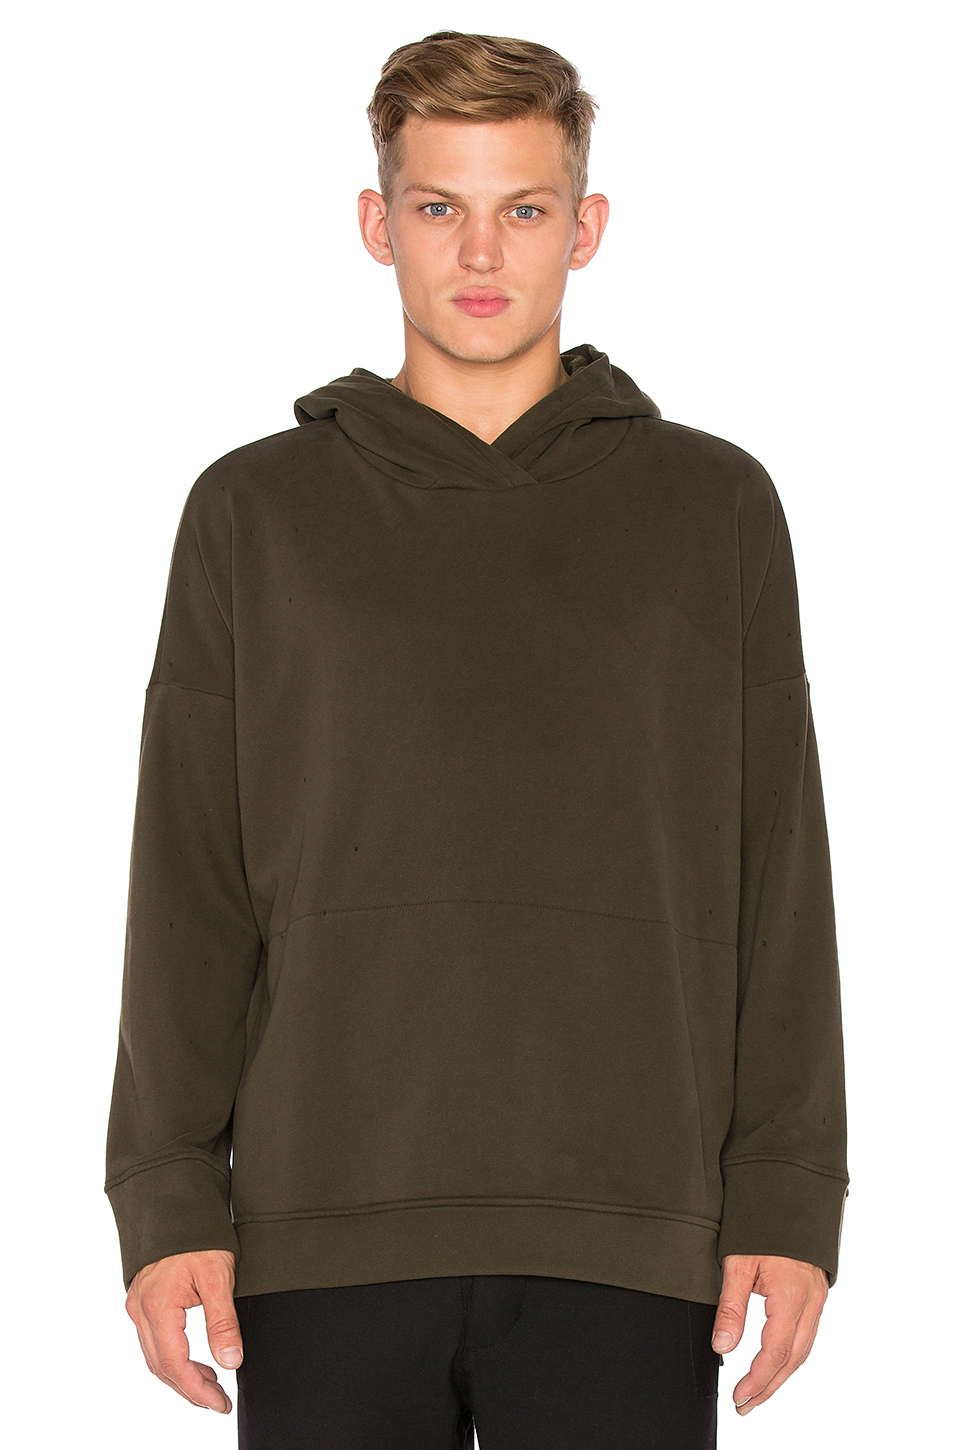 Stampd Cotton Draped Hoodie in Olive (Brown) for Men - Lyst